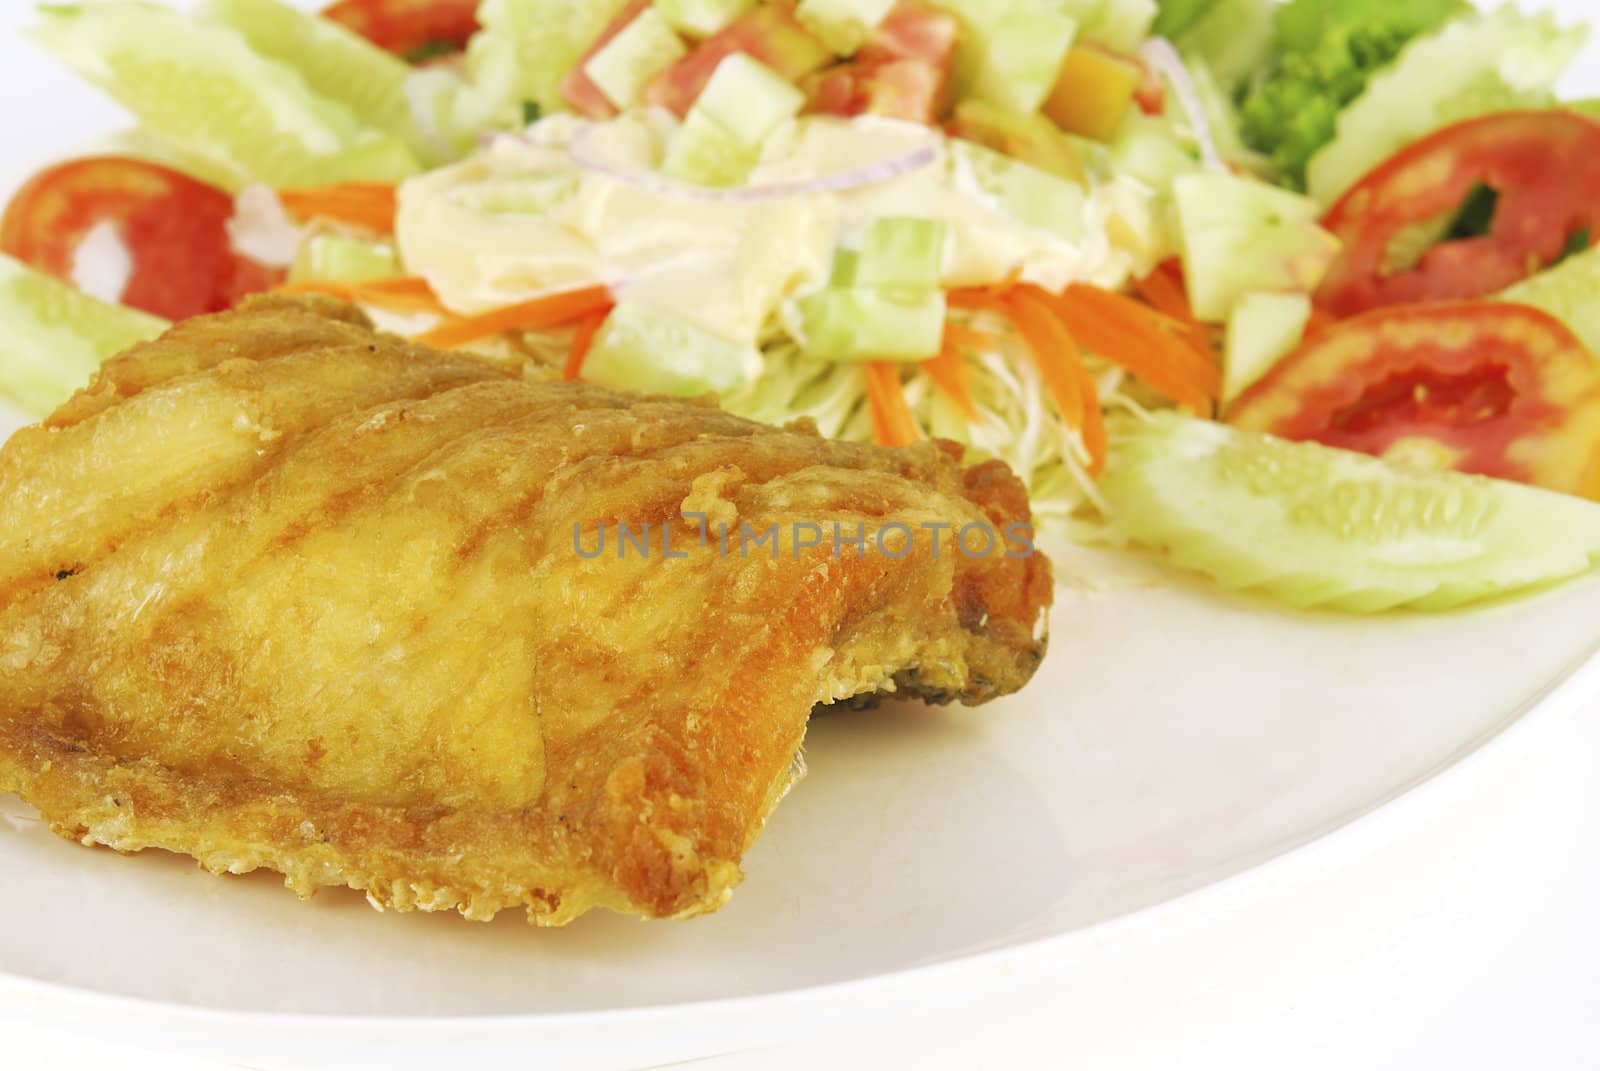 Fish dish - deep fried fish with vegetable salad on white